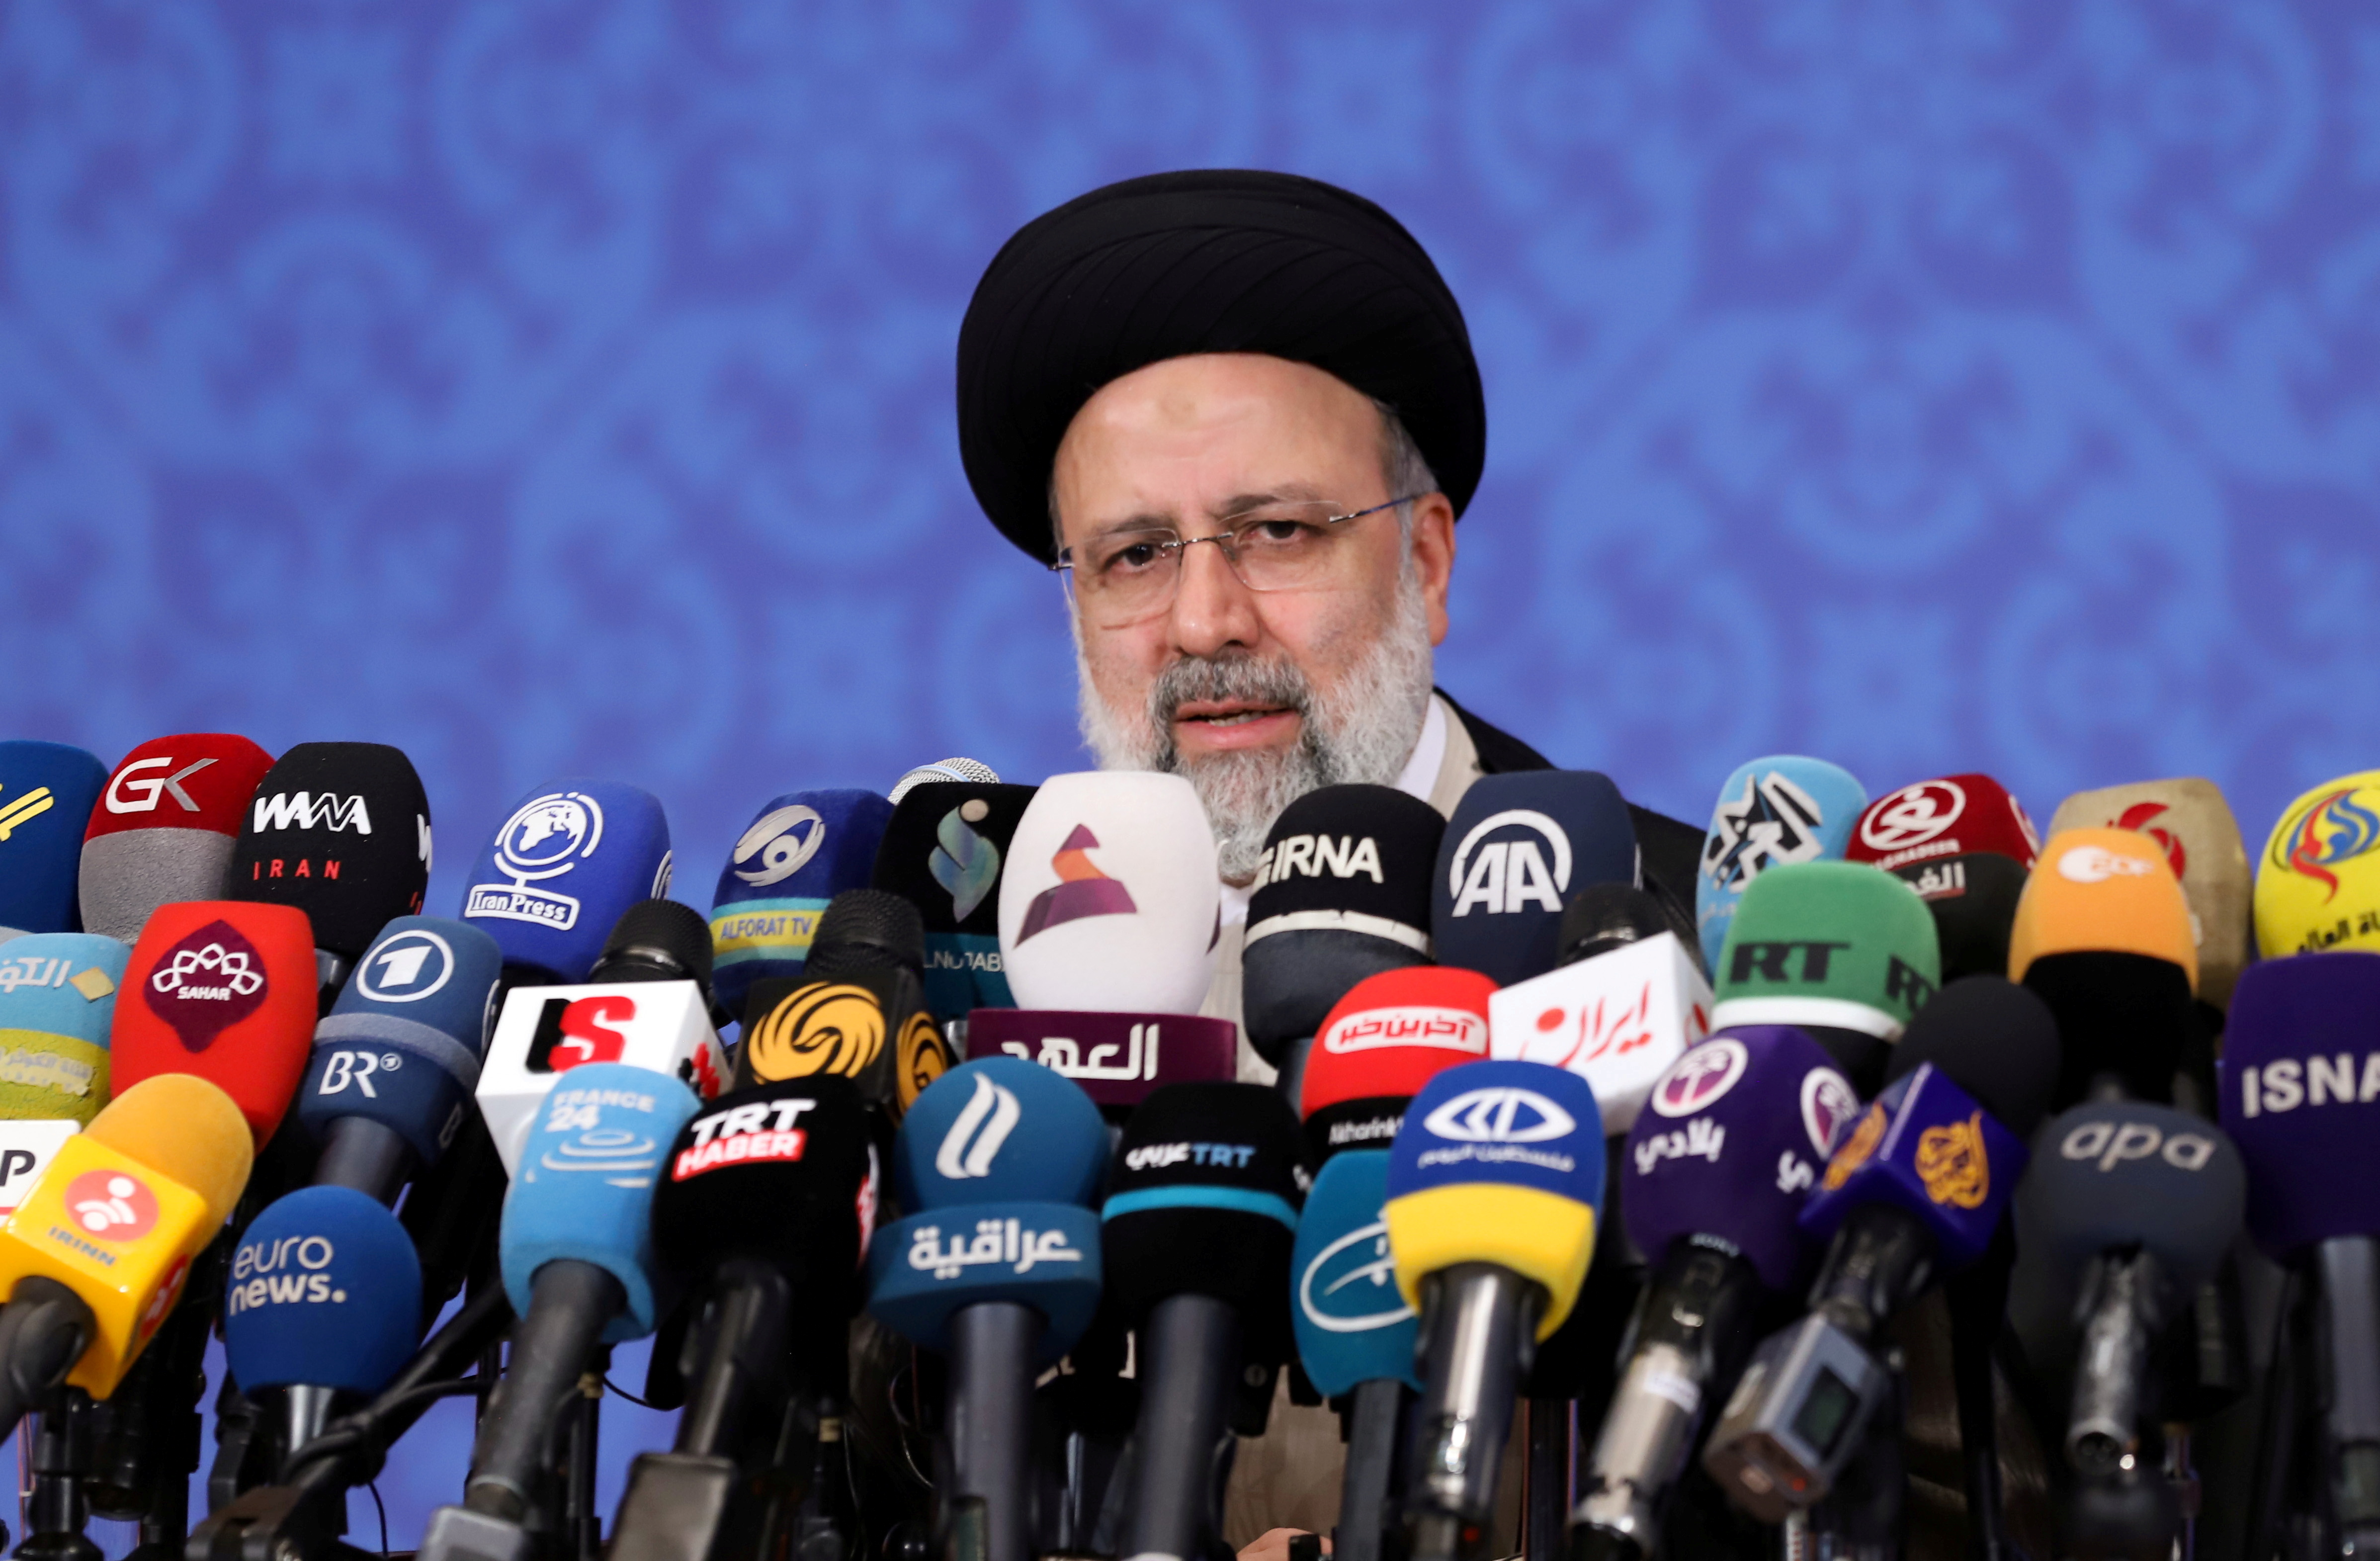 Iran's President-elect Ebrahim Raisi speaks during a news conference in Tehran, Iran June 21, 2021. Majid Asgaripour/WANA (West Asia News Agency) via REUTERS